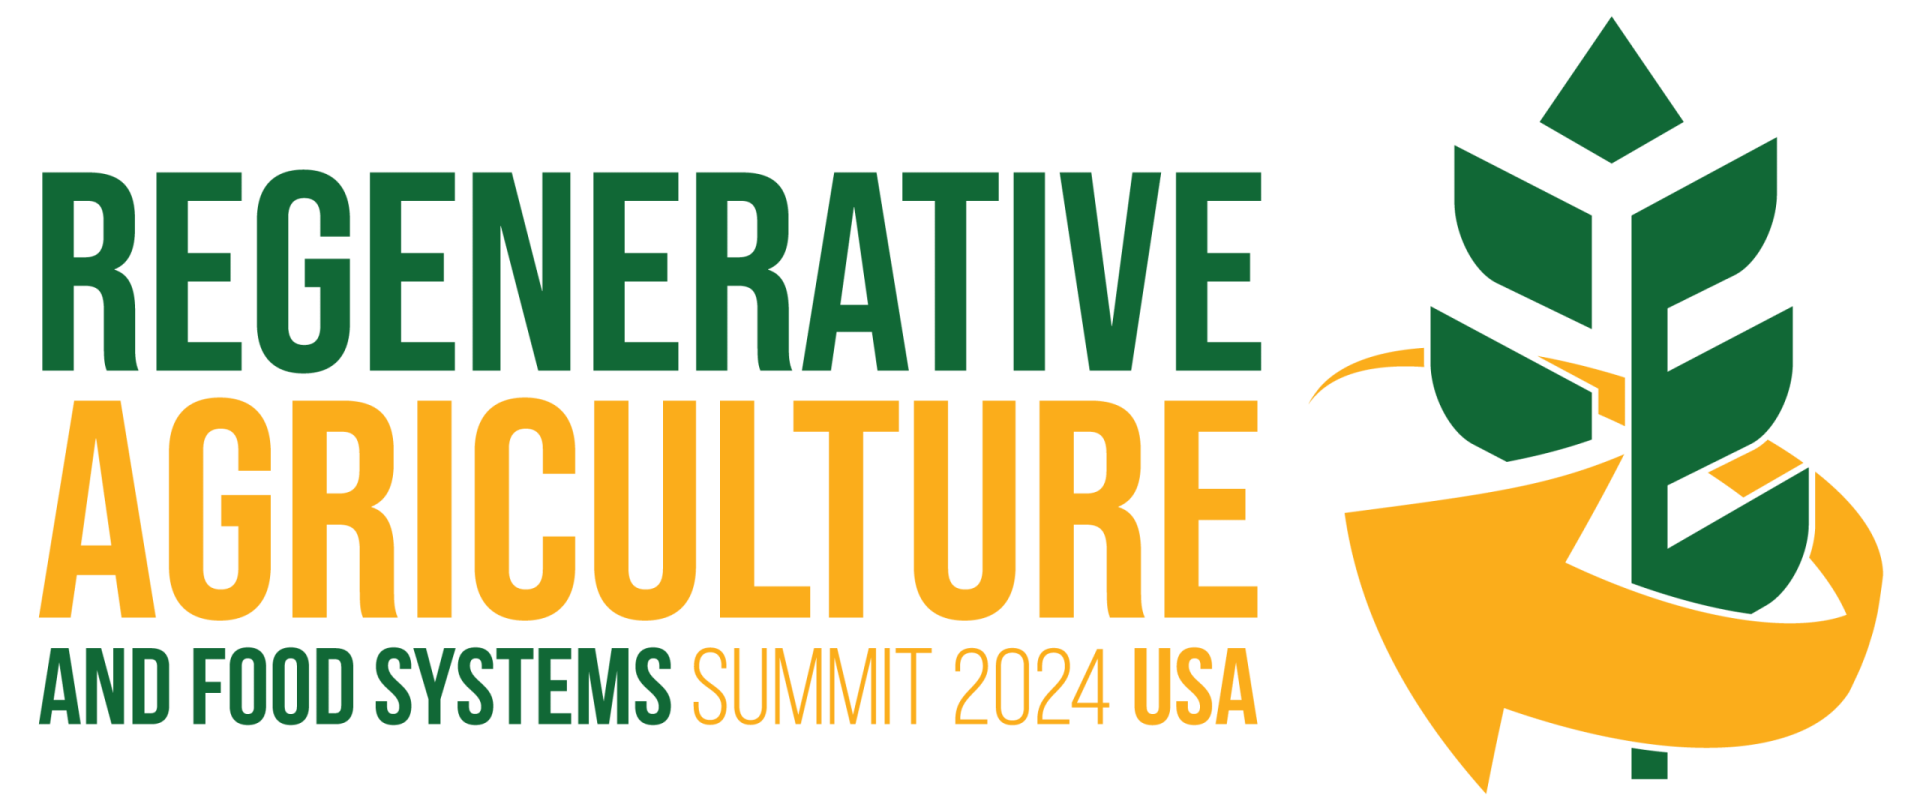 2025 Regenerative Agriculture & Food Systems Summit USA